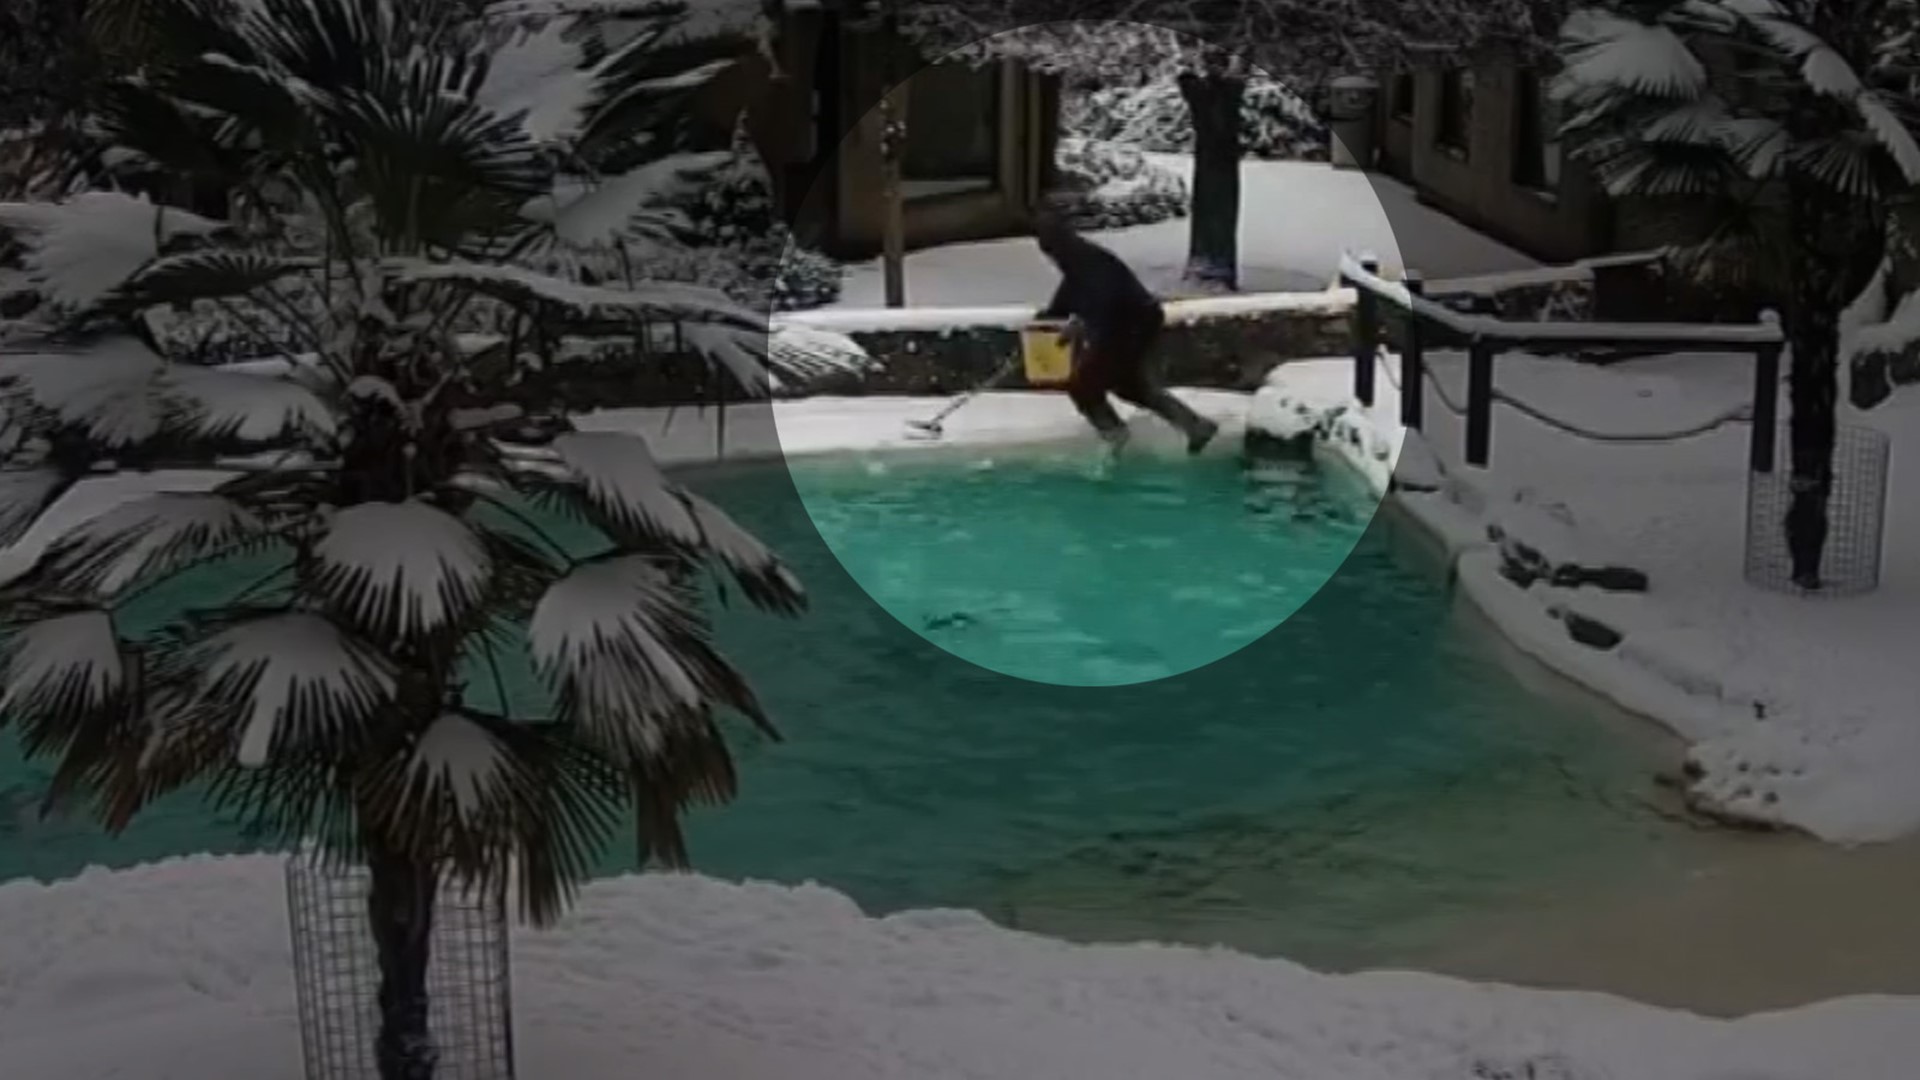 A worker slipped into the penguin pool at an animal park in England.